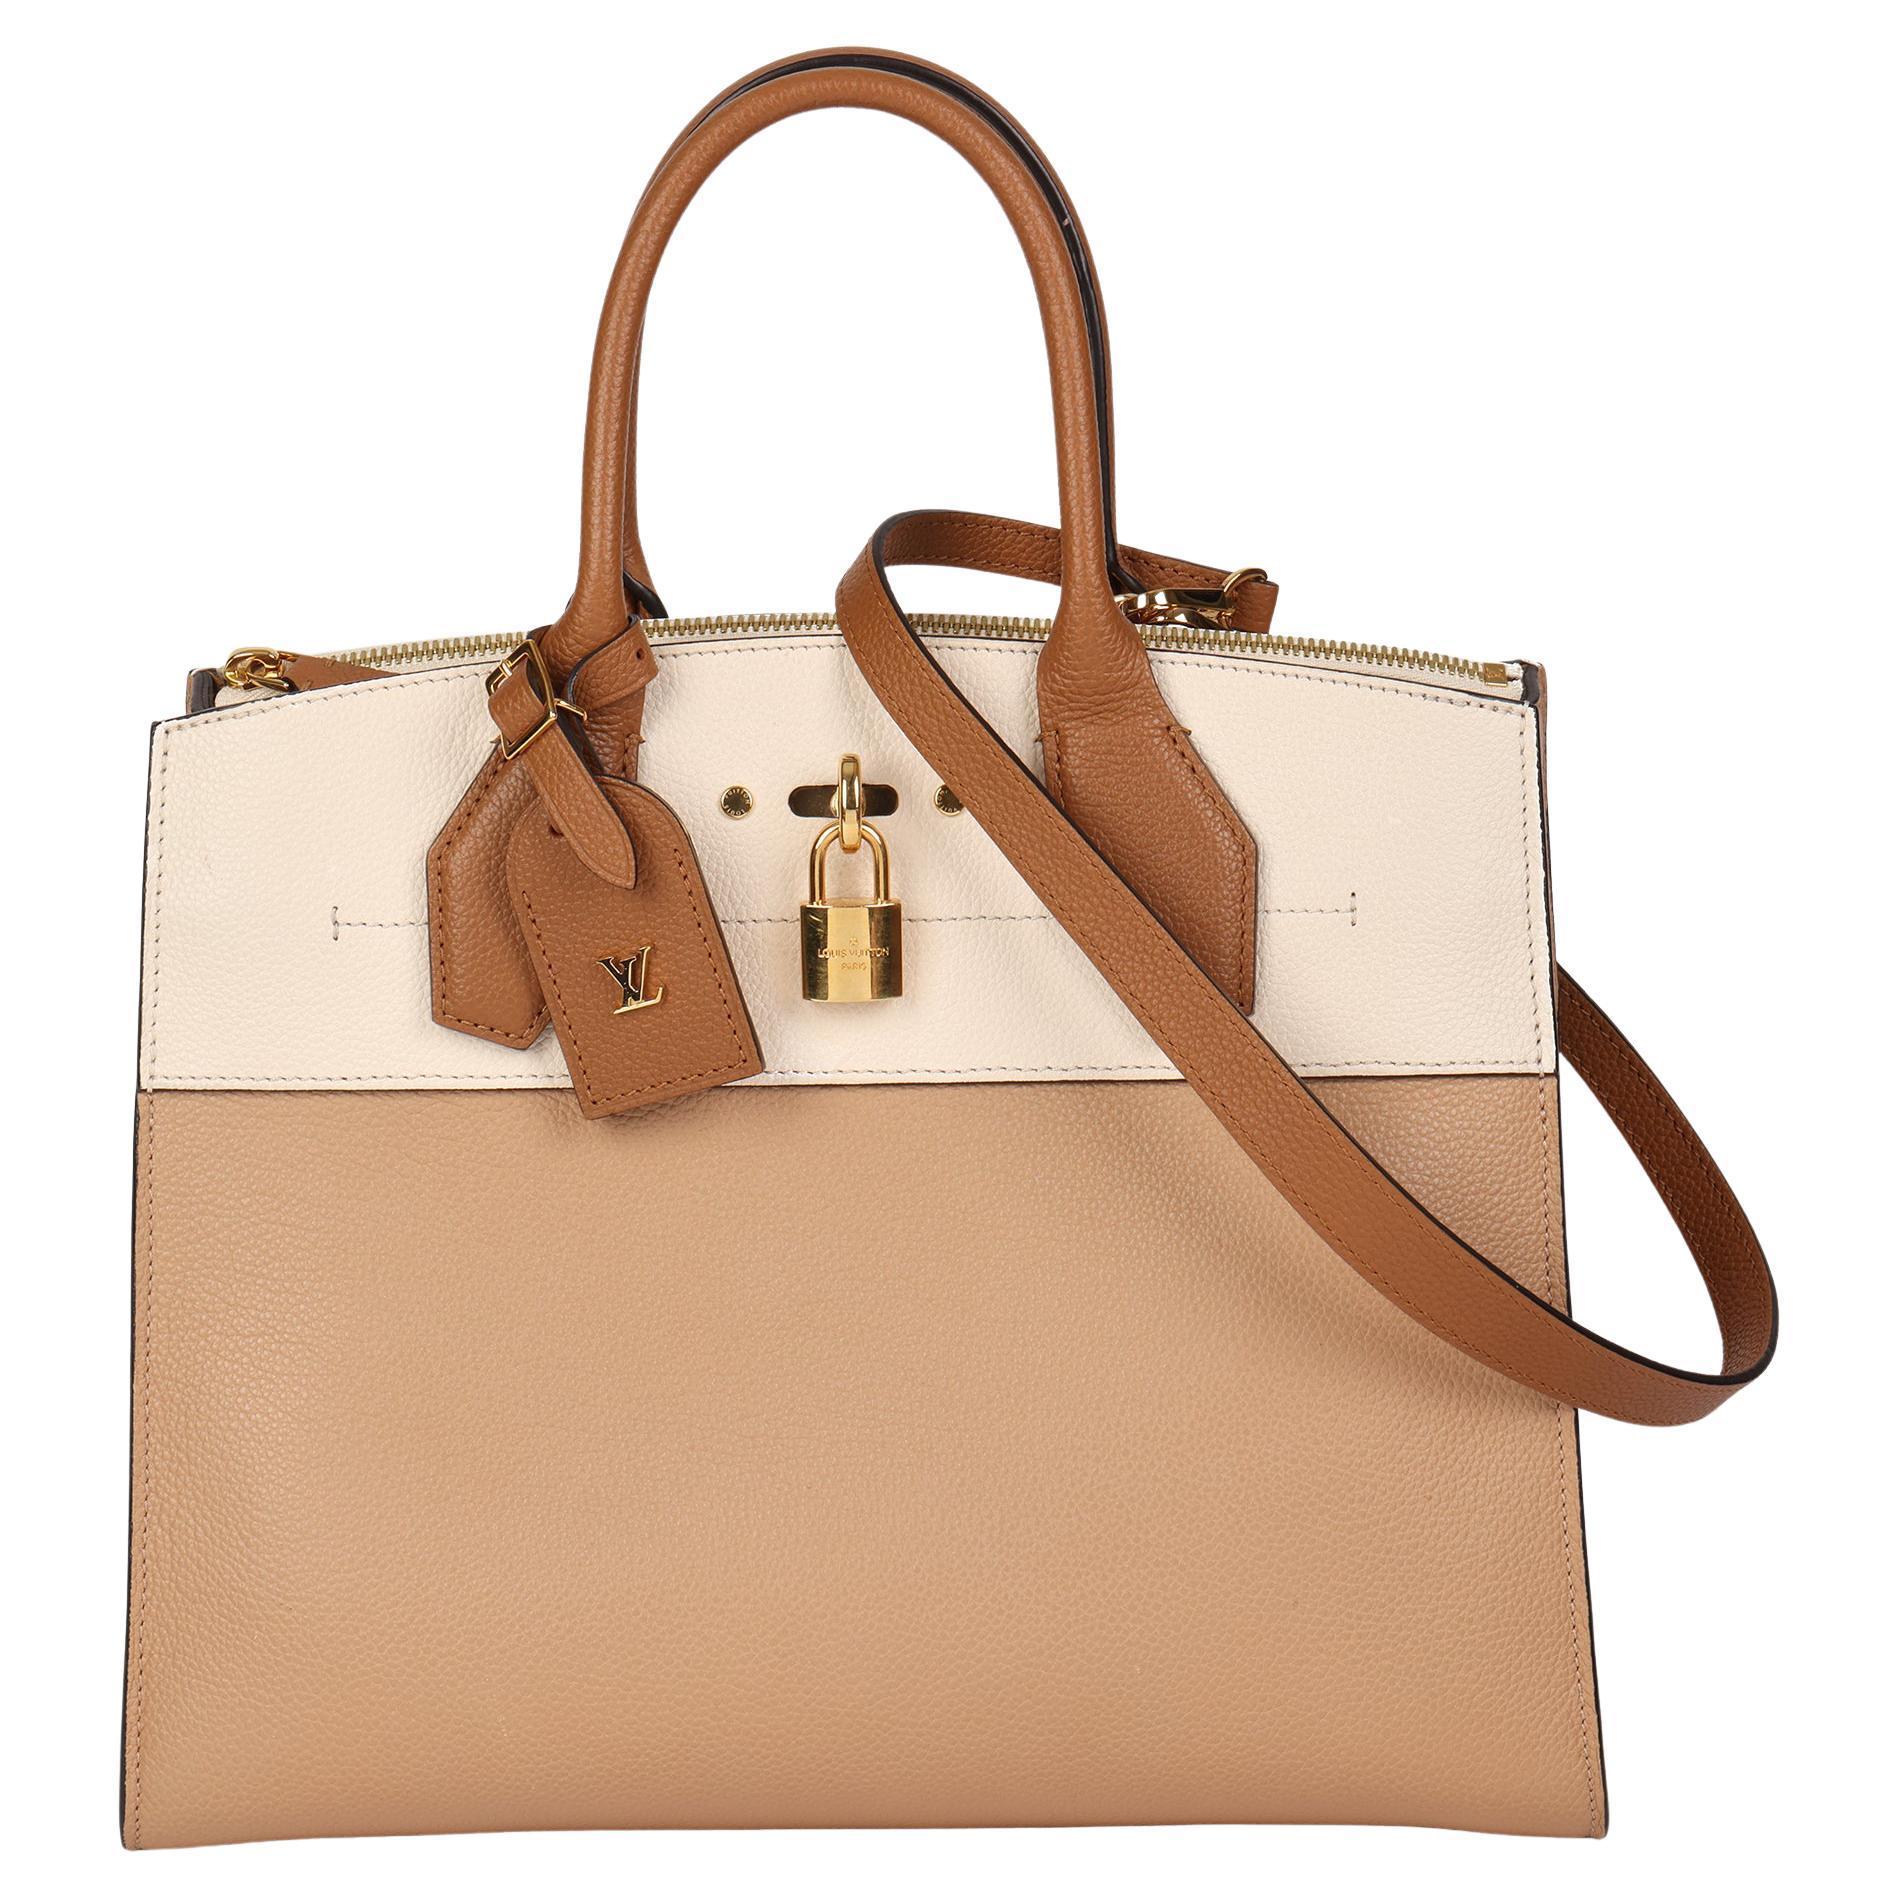 LOUIS VUITTON Galet, Beige and Tan Grained Calfskin Leather City